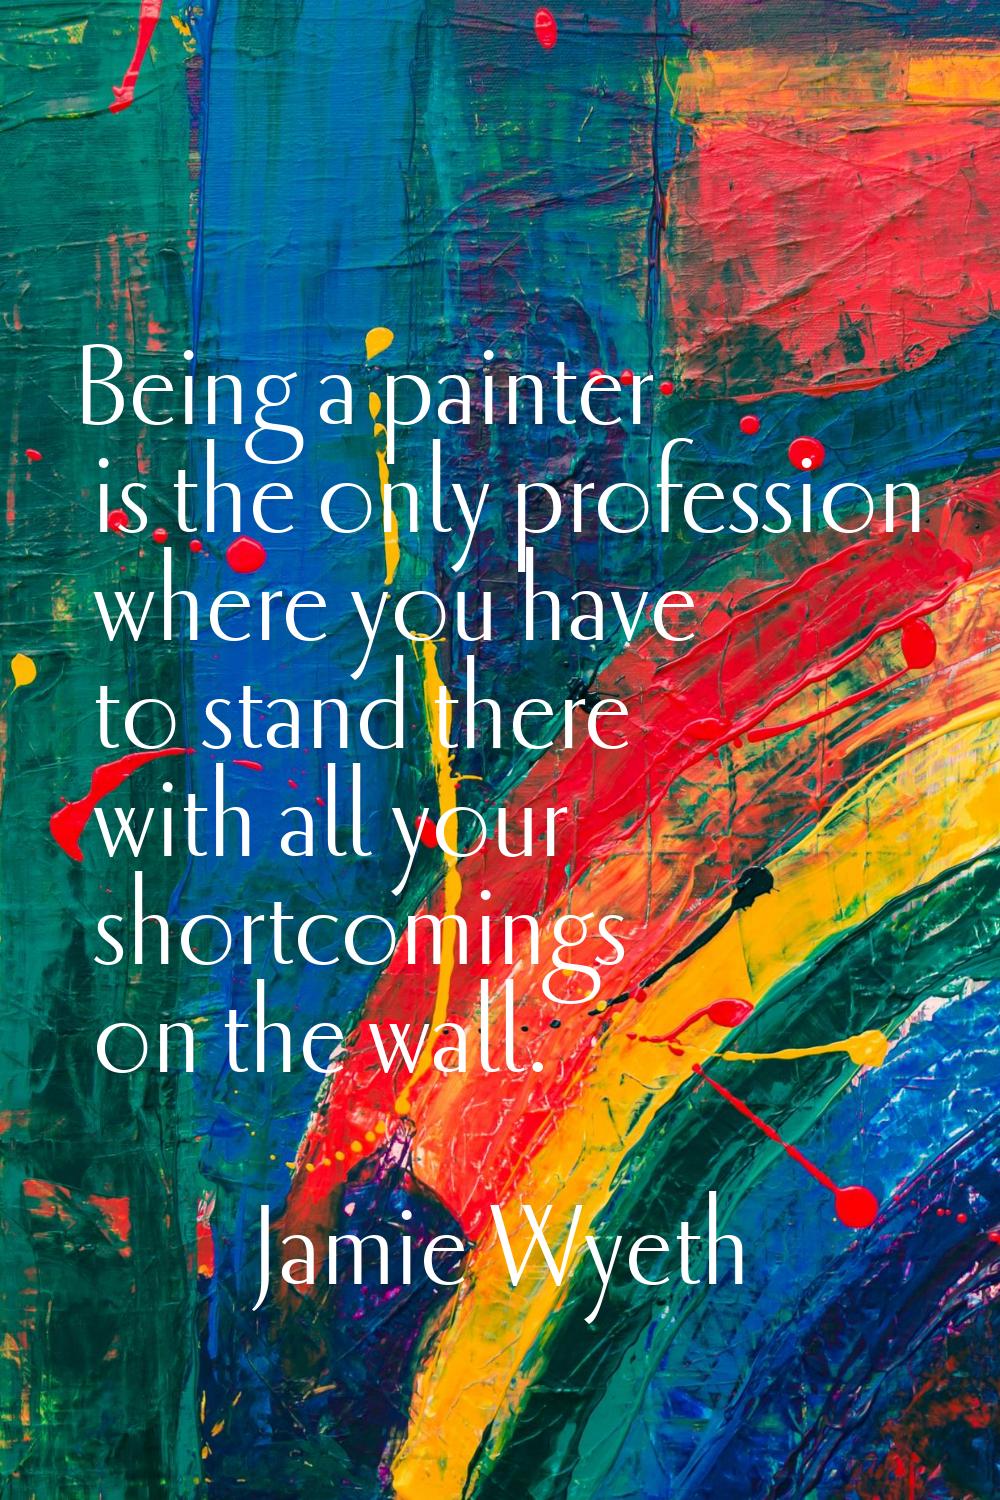 Being a painter is the only profession where you have to stand there with all your shortcomings on 